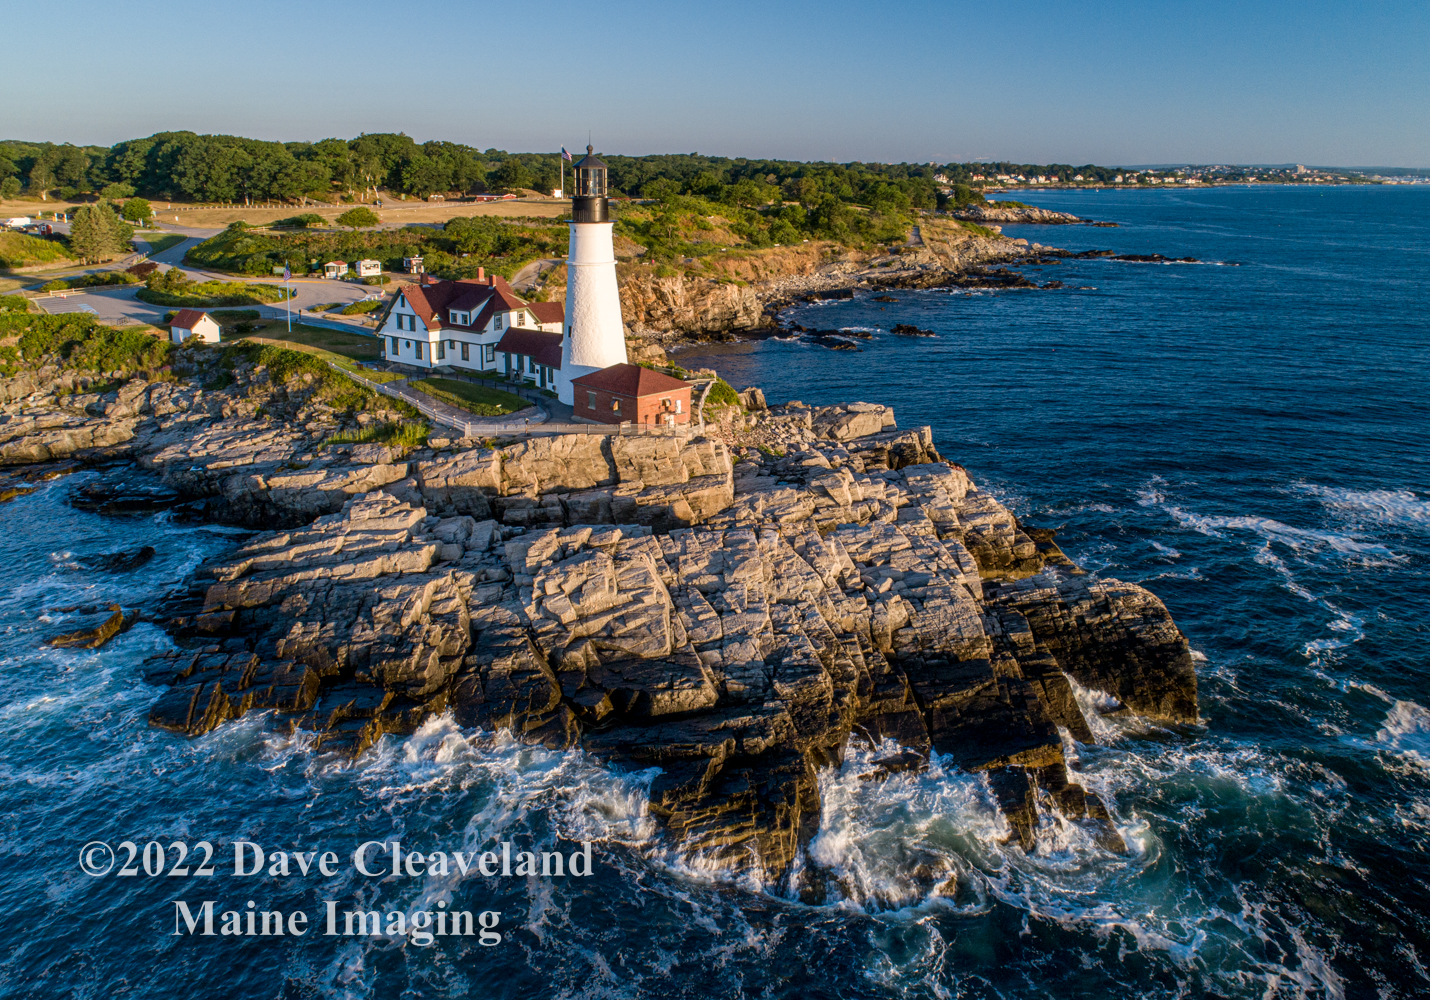 Our drone captures early morning light at Portland Head Light, Cape Elizabeth, Maine.